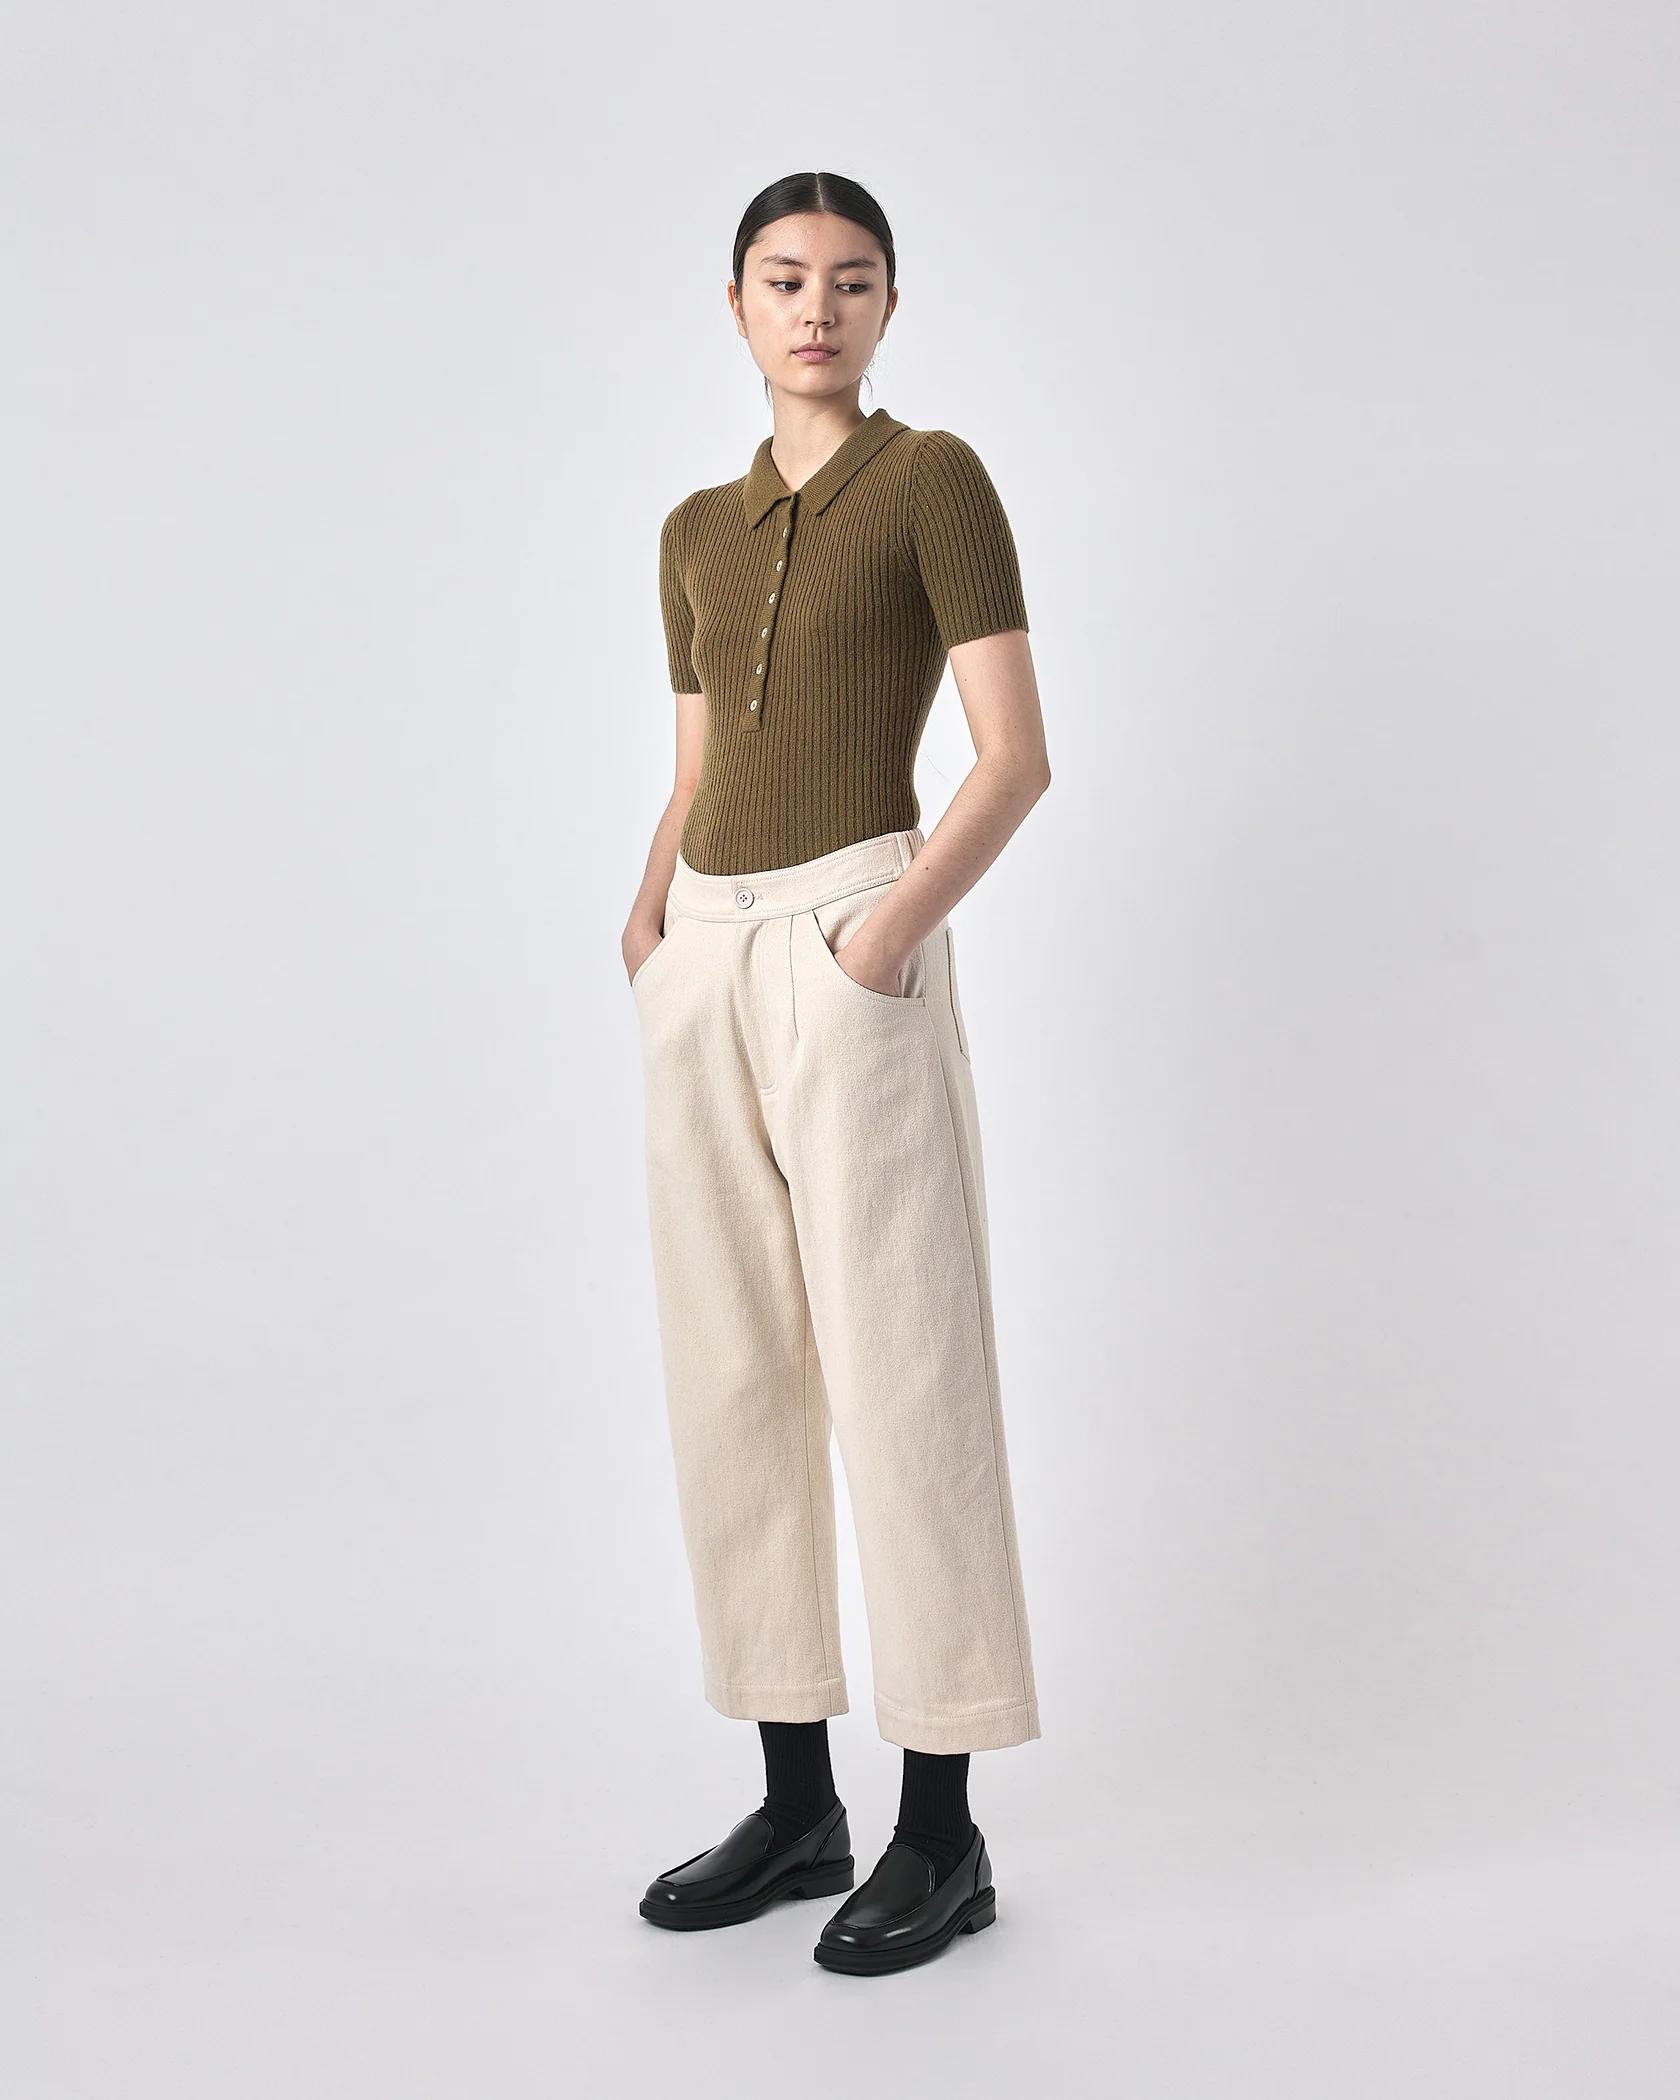 Product Image for Molly Collared Short-Sleeves, Kelp